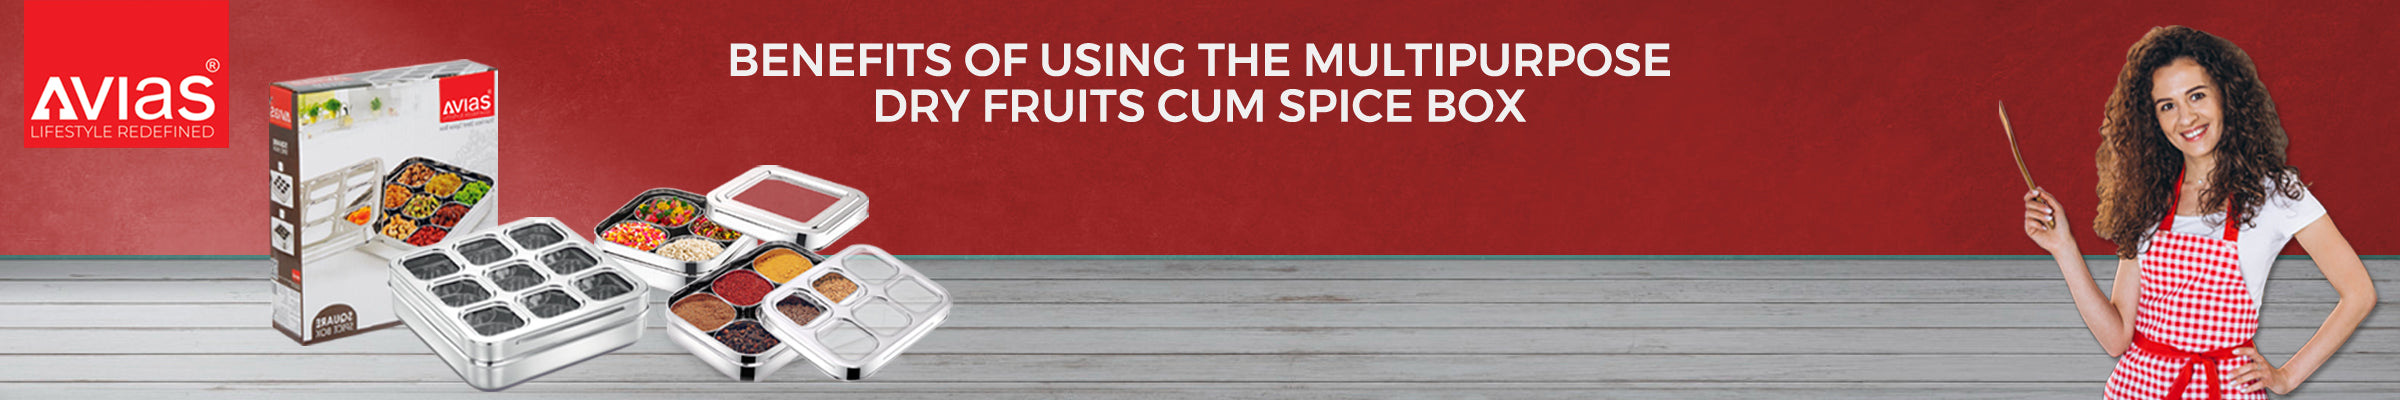 Benefits of using the multipurpose Dry fruits cum Spice box